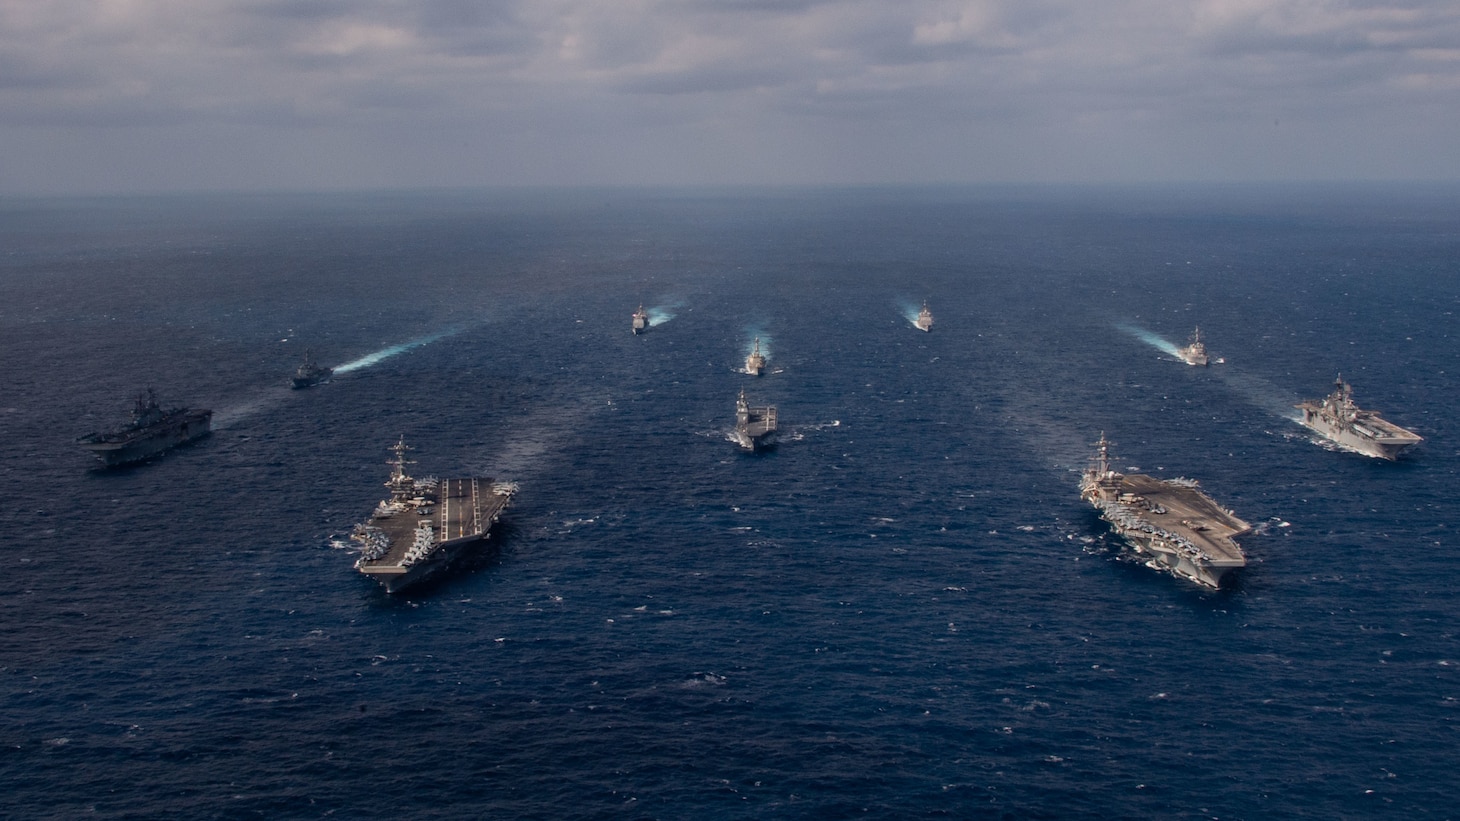 220122-N-PQ495-1384 PHILIPPINE SEA (Jan. 22, 2022) From left, Wasp-class landing helicopter dock USS Essex (LHD 2), Arleigh Burke-class guided-missile destroyer USS Gridley (DDG 101), Nimitz-class aircraft carrier USS Abraham Lincoln (CVN 72), Ticonderoga-class guided-missile cruiser USS Mobile Bay (CG 53), Arleigh Burke-class guided-missile destroyer USS Chafee (DDG 90), Japan Maritime Self-Defense Force (JMSDF) Hyuga-class helicopter destroyer JS Hyuga (DDH 181), Ticonderoga-class guided-missile cruiser USS Lake Champlain (CG 57), Nimitz-class aircraft carrier USS Carl Vinson (CVN 70), Arleigh Burke-class guided-missile destroyer USS Spruance (DDG 111) and America-class amphibious assault ship USS America (LHA 6) transit the Philippine Sea Jan. 22, 2022. Operating as part of U.S. Pacific Fleet, units assigned to Carl Vinson and Abraham Lincoln Carrier Strike Groups, Essex and America Amphibious Ready Groups and JMSDF are conducting training to preserve and protect a free and open Indo-Pacific region. (U.S. Navy photo by Mass Communication Specialist Seaman Larissa T. Dougherty)